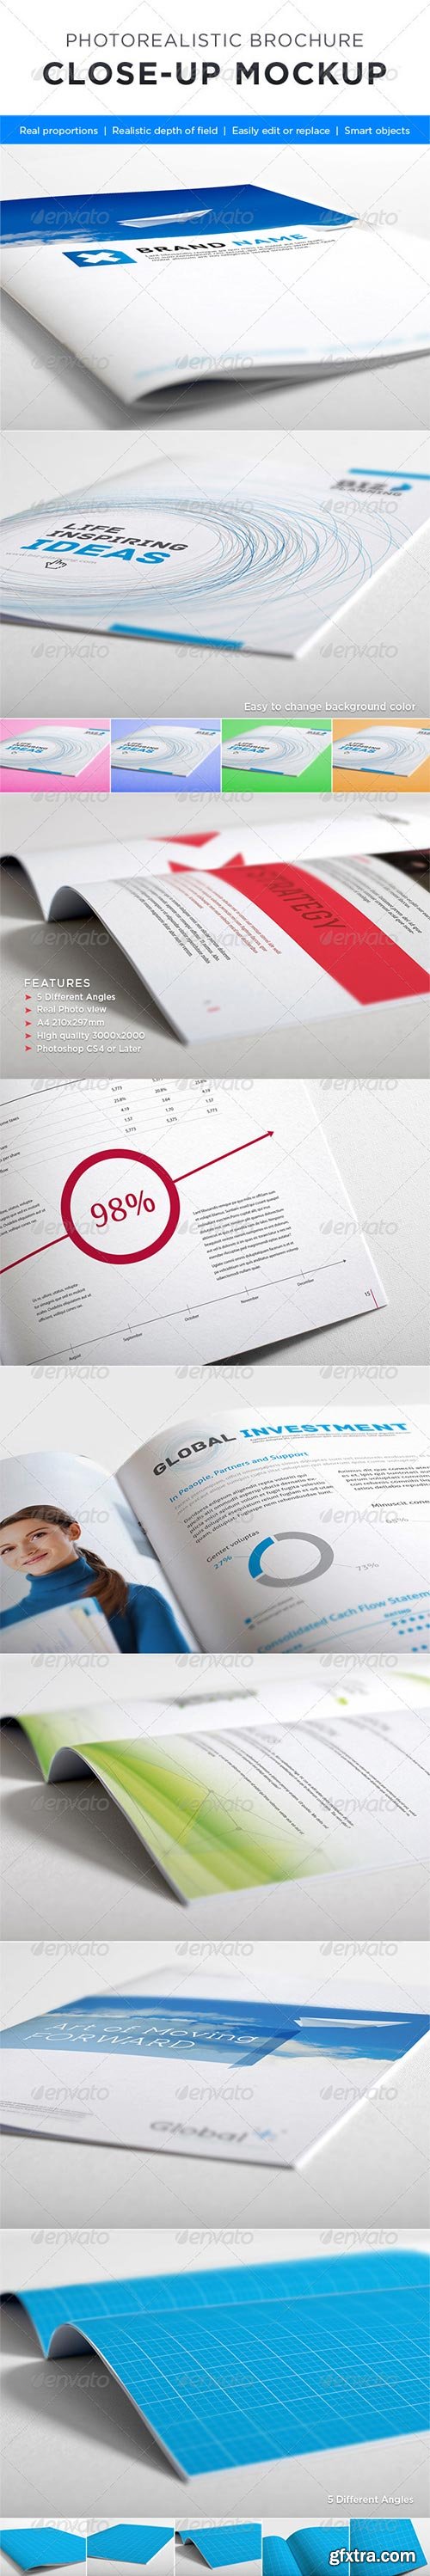 GraphicRiver - Photorealistic Brochure Close-up Mock-up